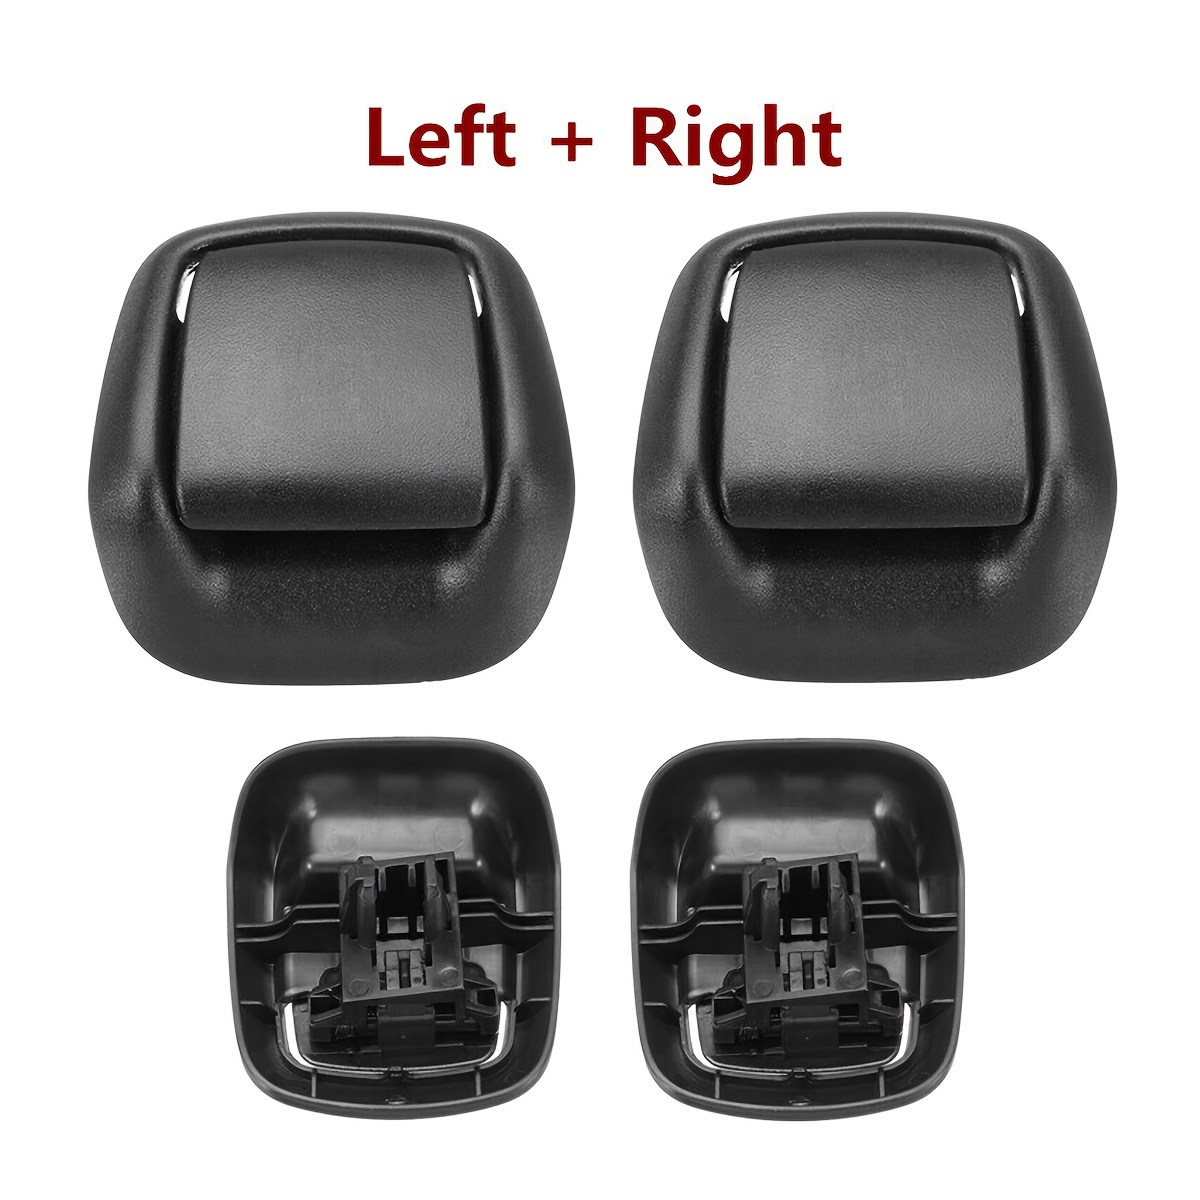 2 Pack Right/Left Hand Front Seat Tilt Release Handles Levers For Ford  Fiesta MK6 VI 3 Door 2002-2008 1417521 1417520 Auto Seat Accessories